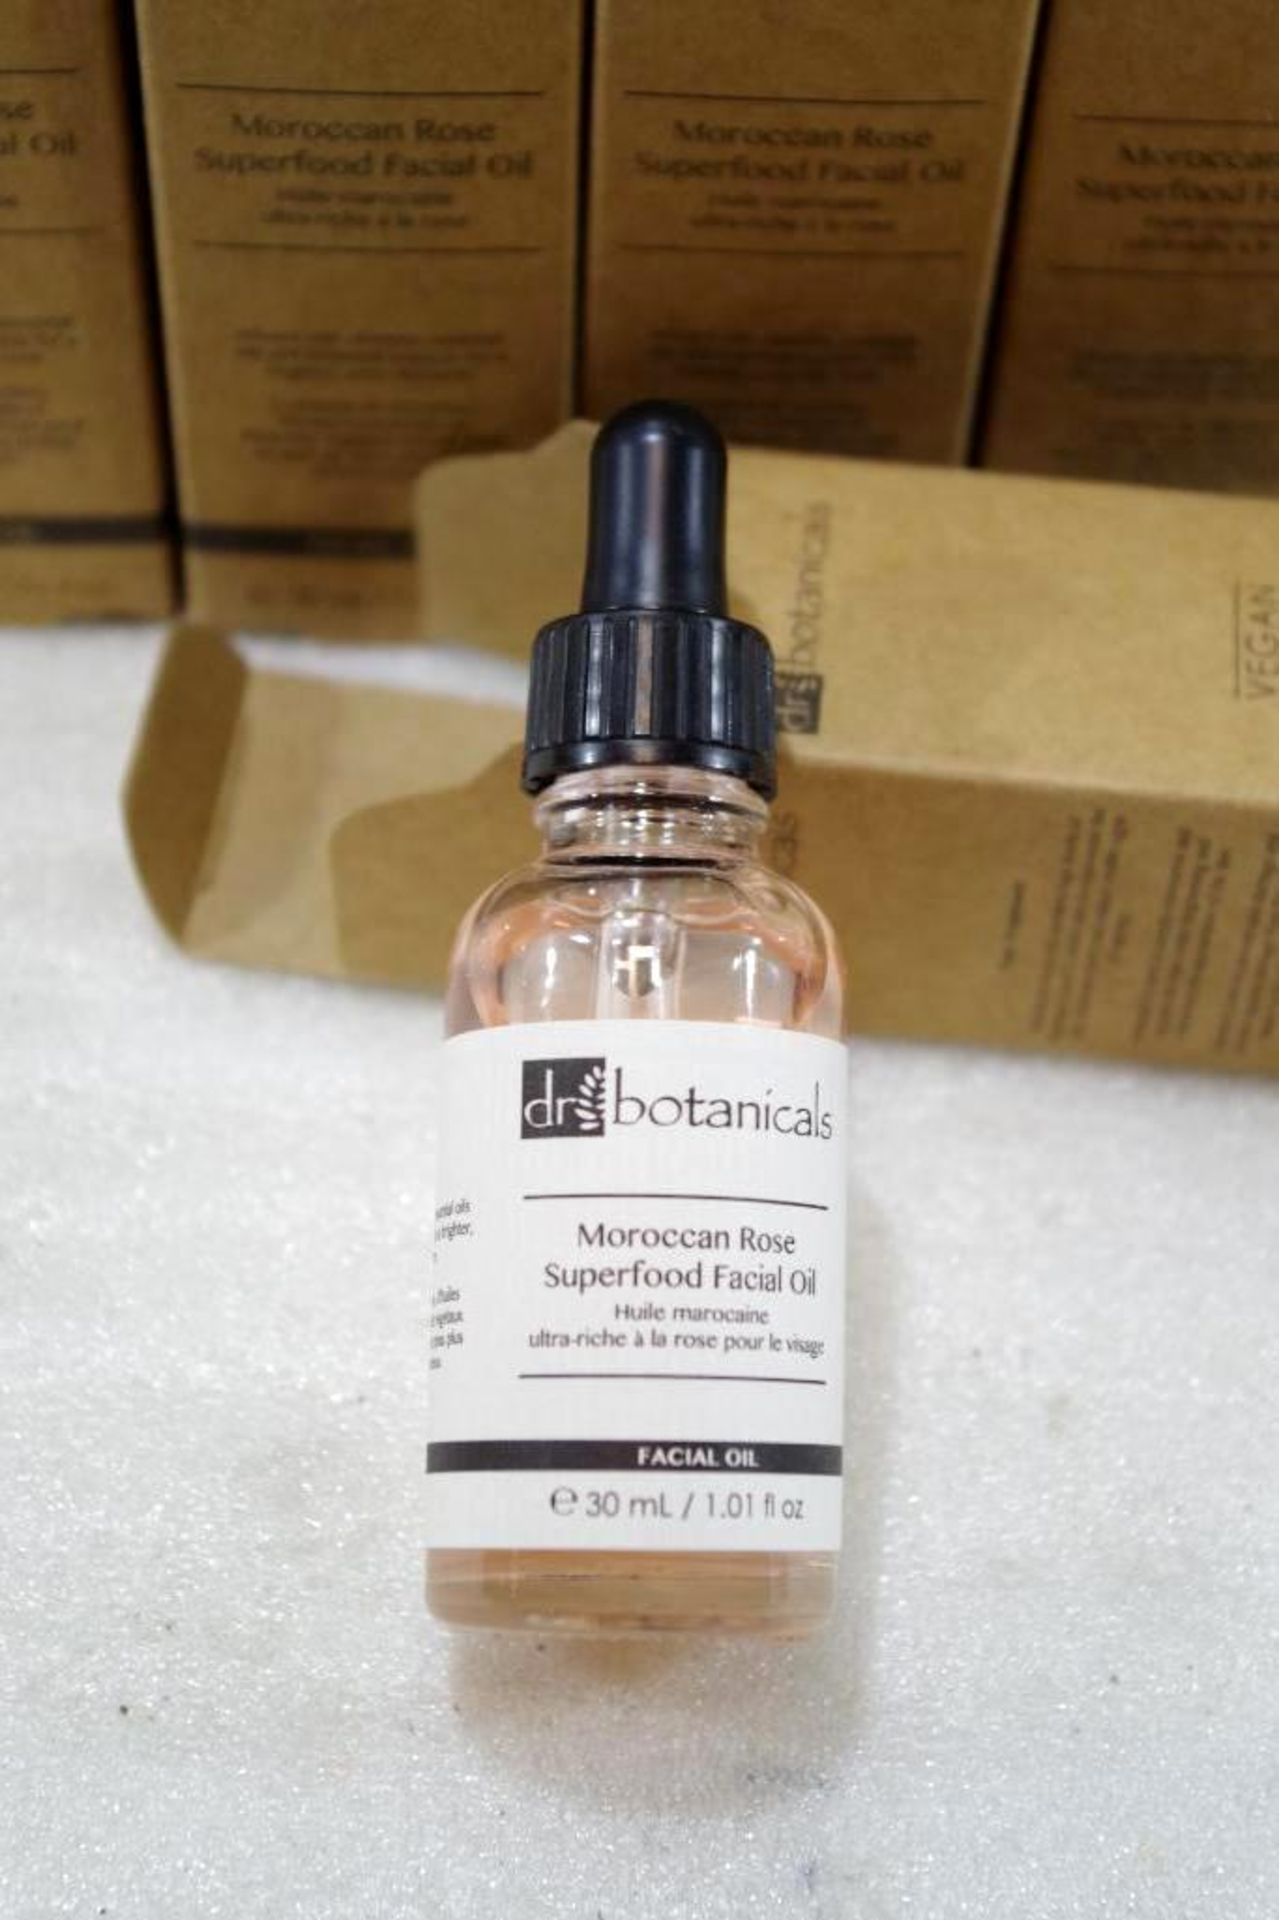 [6] NEW DR BOTANICALS Moroccan Rose Superfood Facial Oil - Image 2 of 2